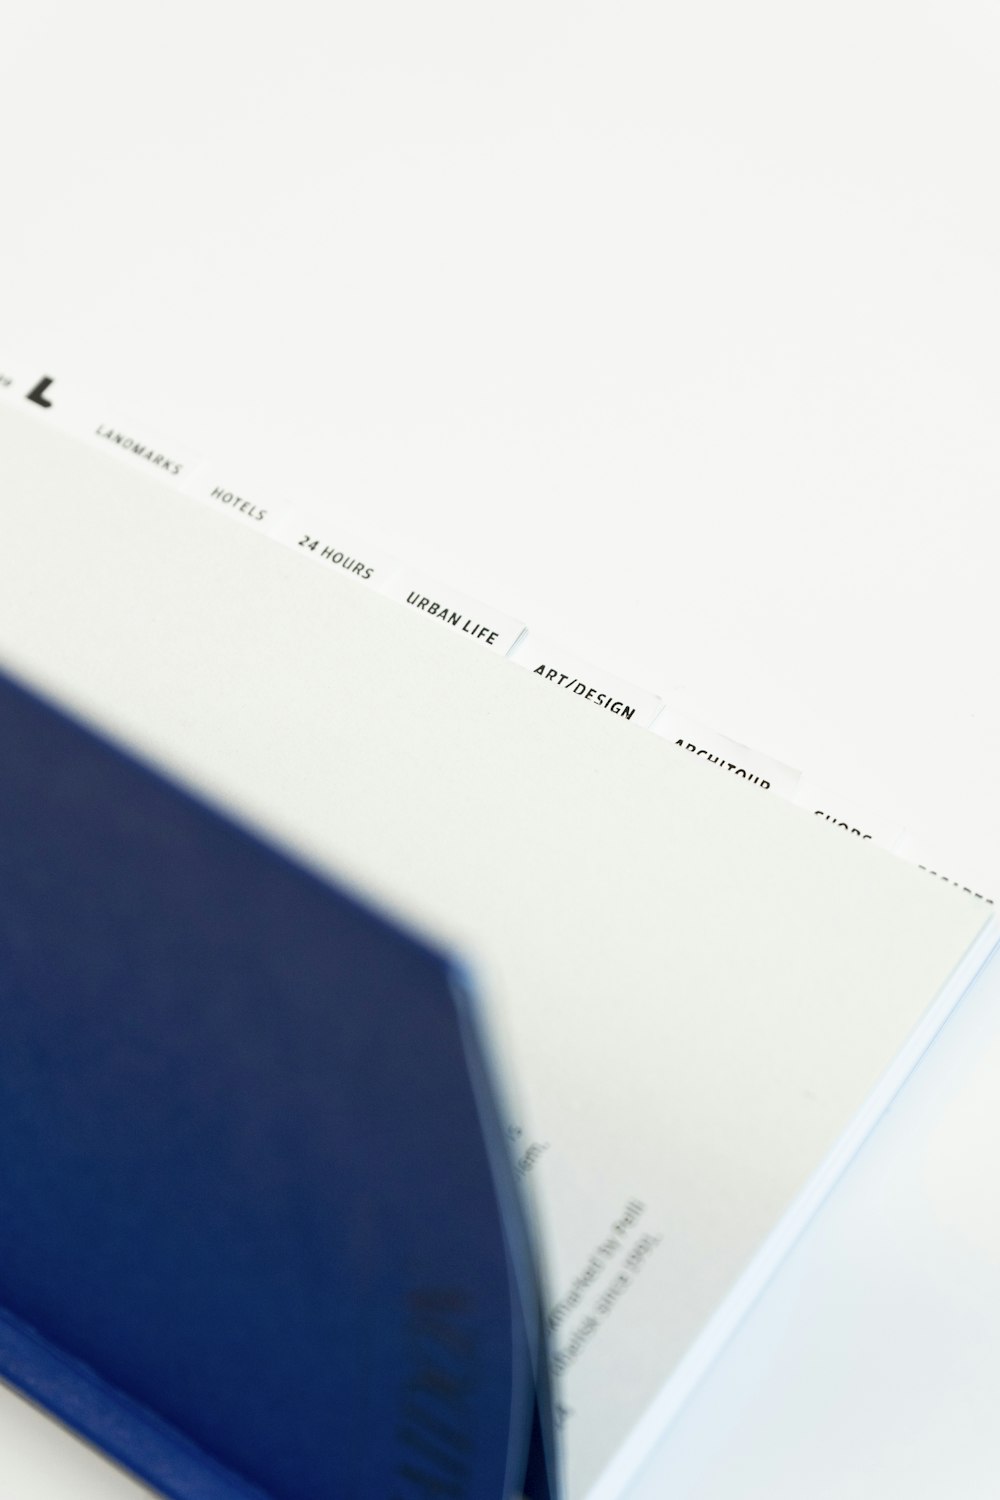 a close up of a blue book on a white surface